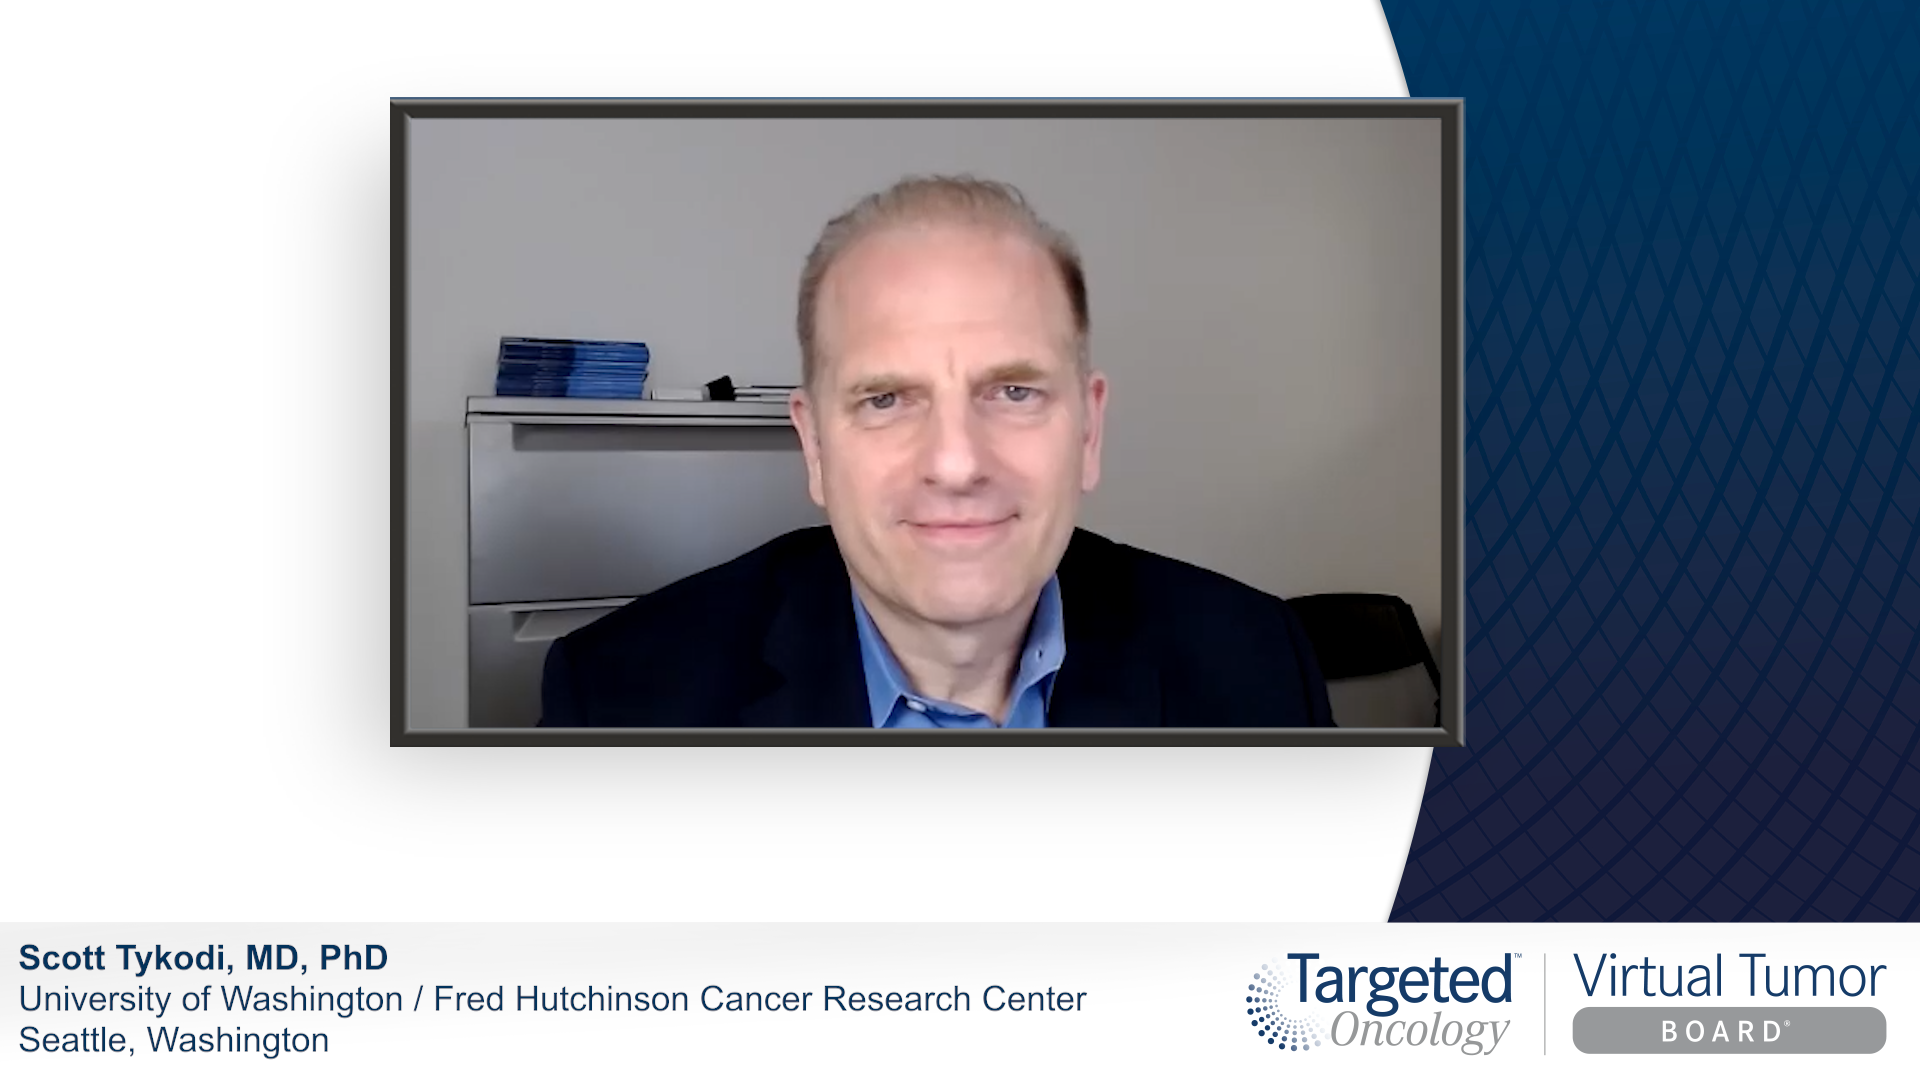 Dosing Strategies for Lenvatinib in Advanced Clear Cell RCC